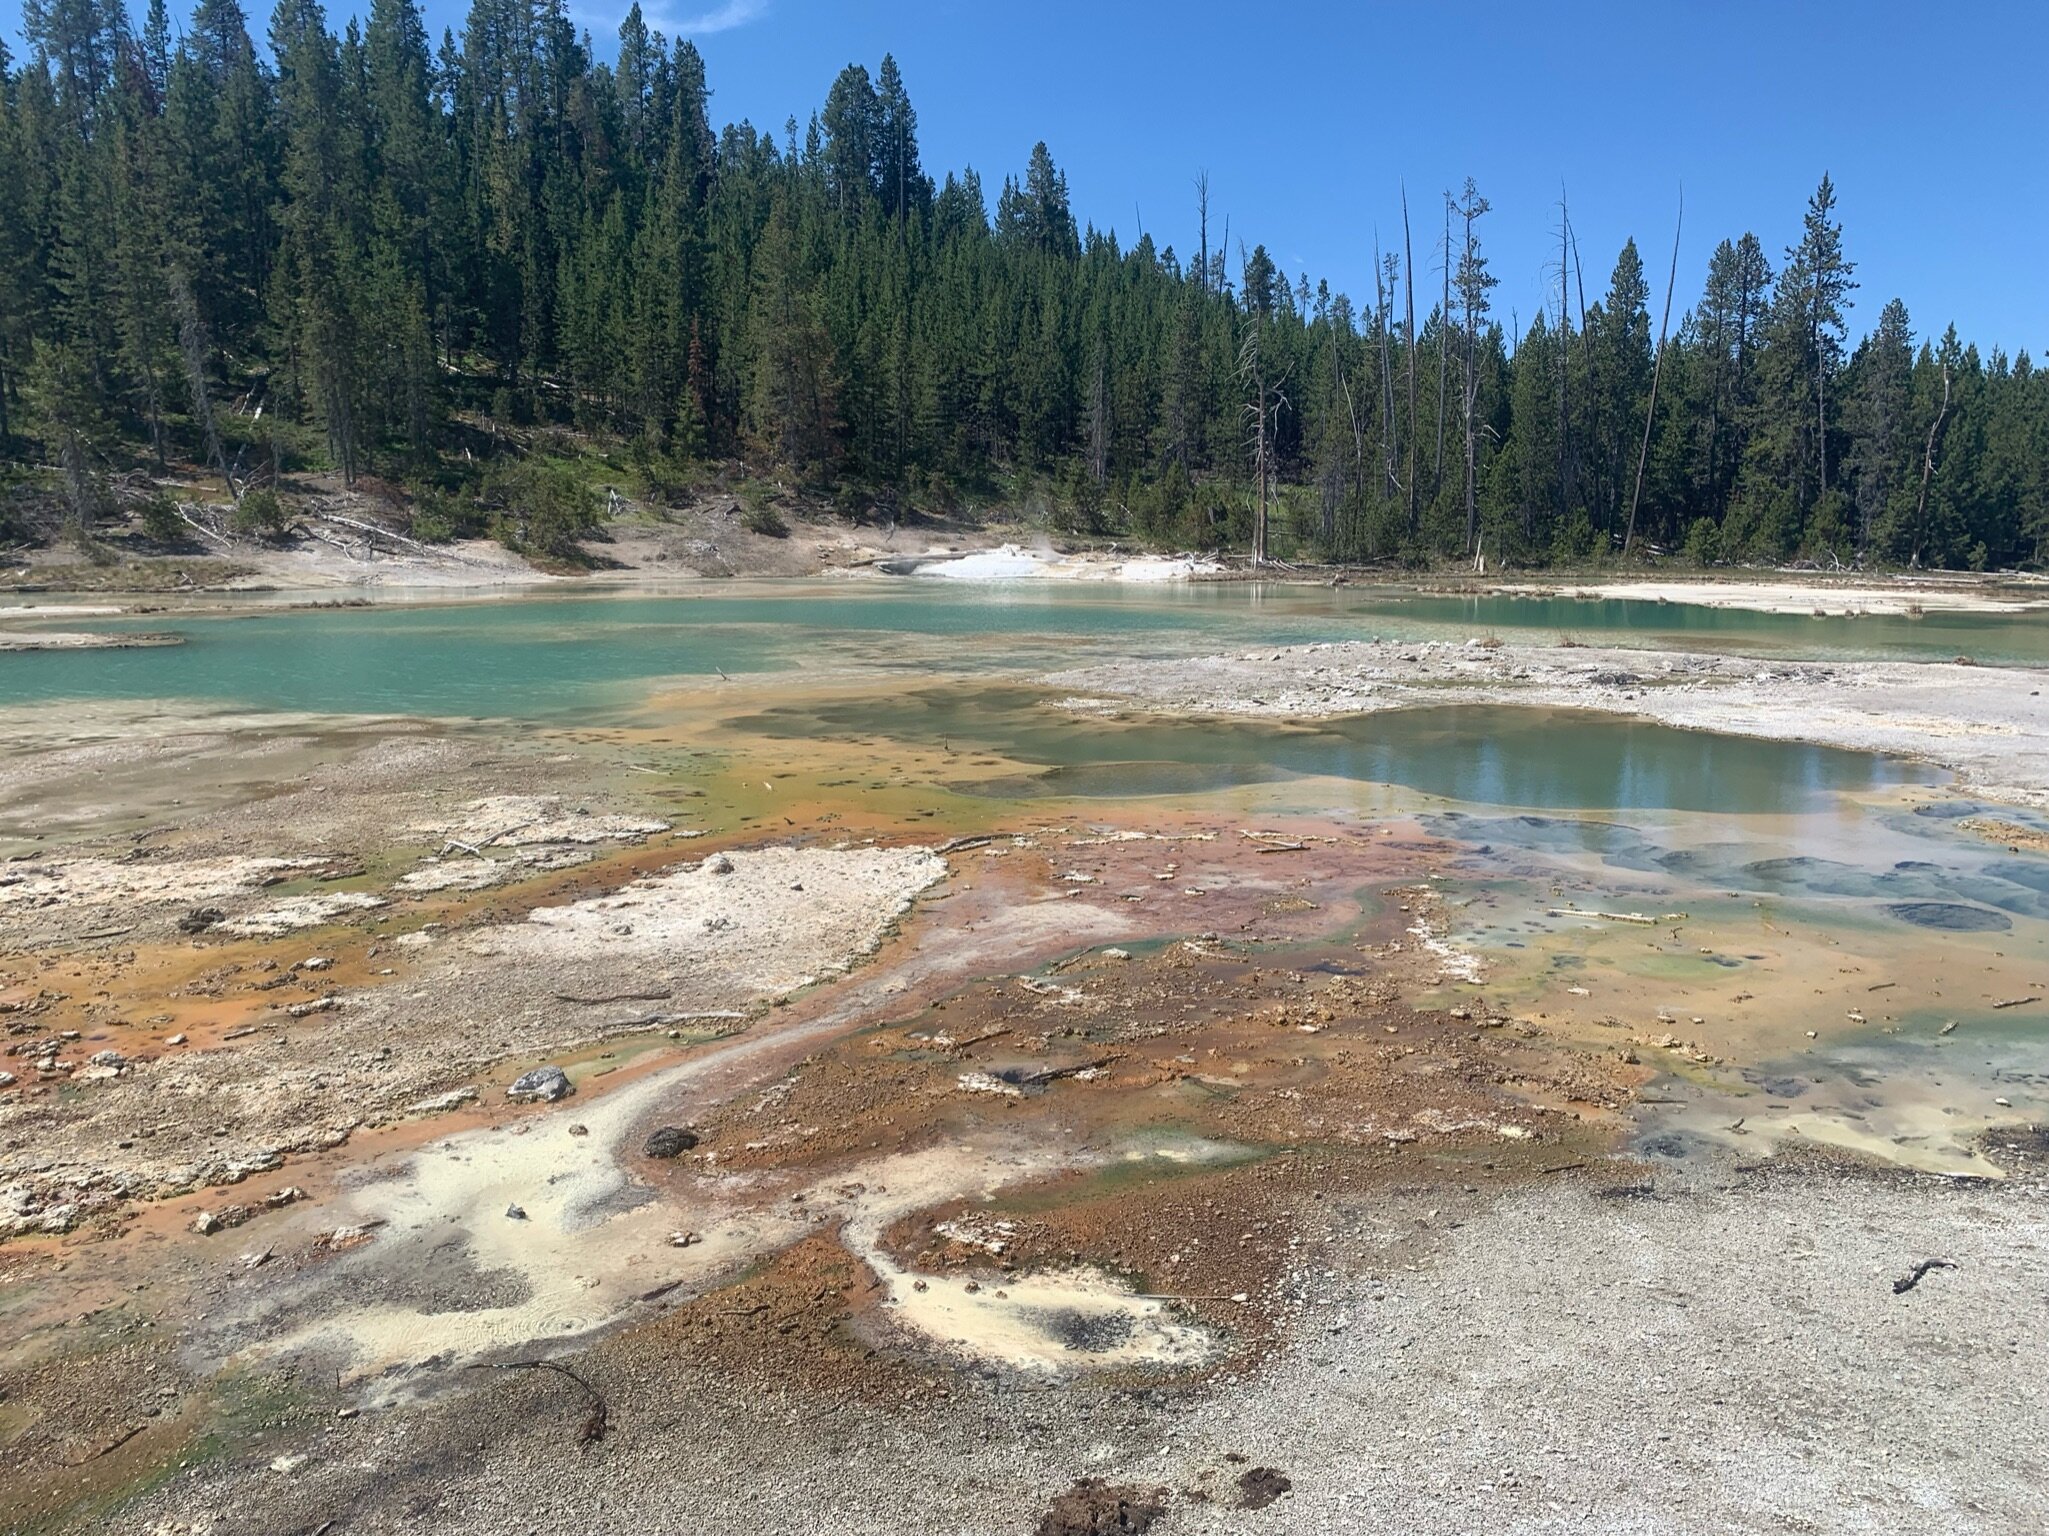 The Norris Geyser Basin at Yellowstone National Park